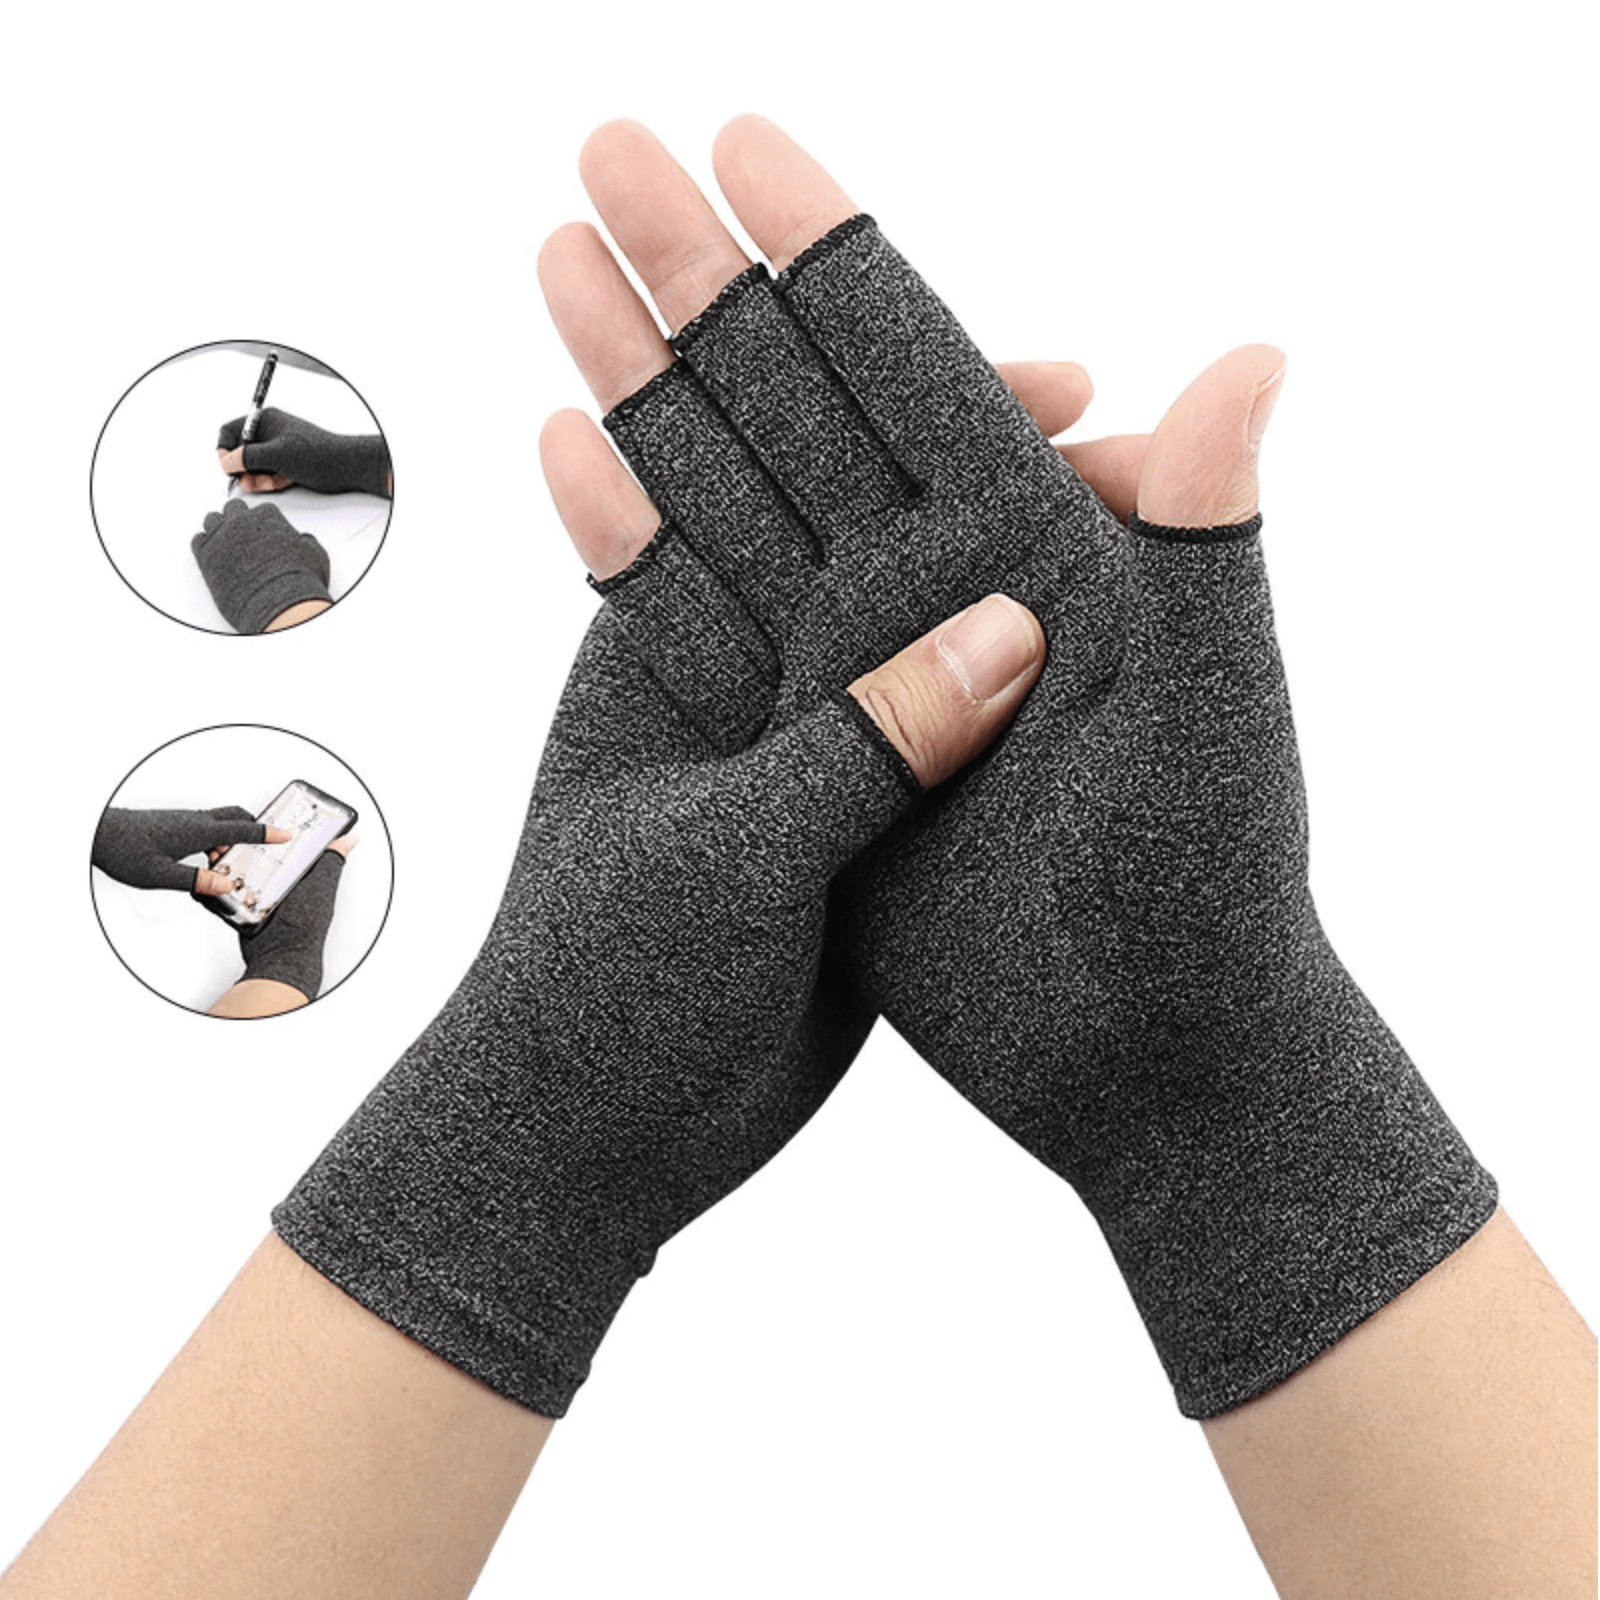 Hand Compression and Arthritis Gloves